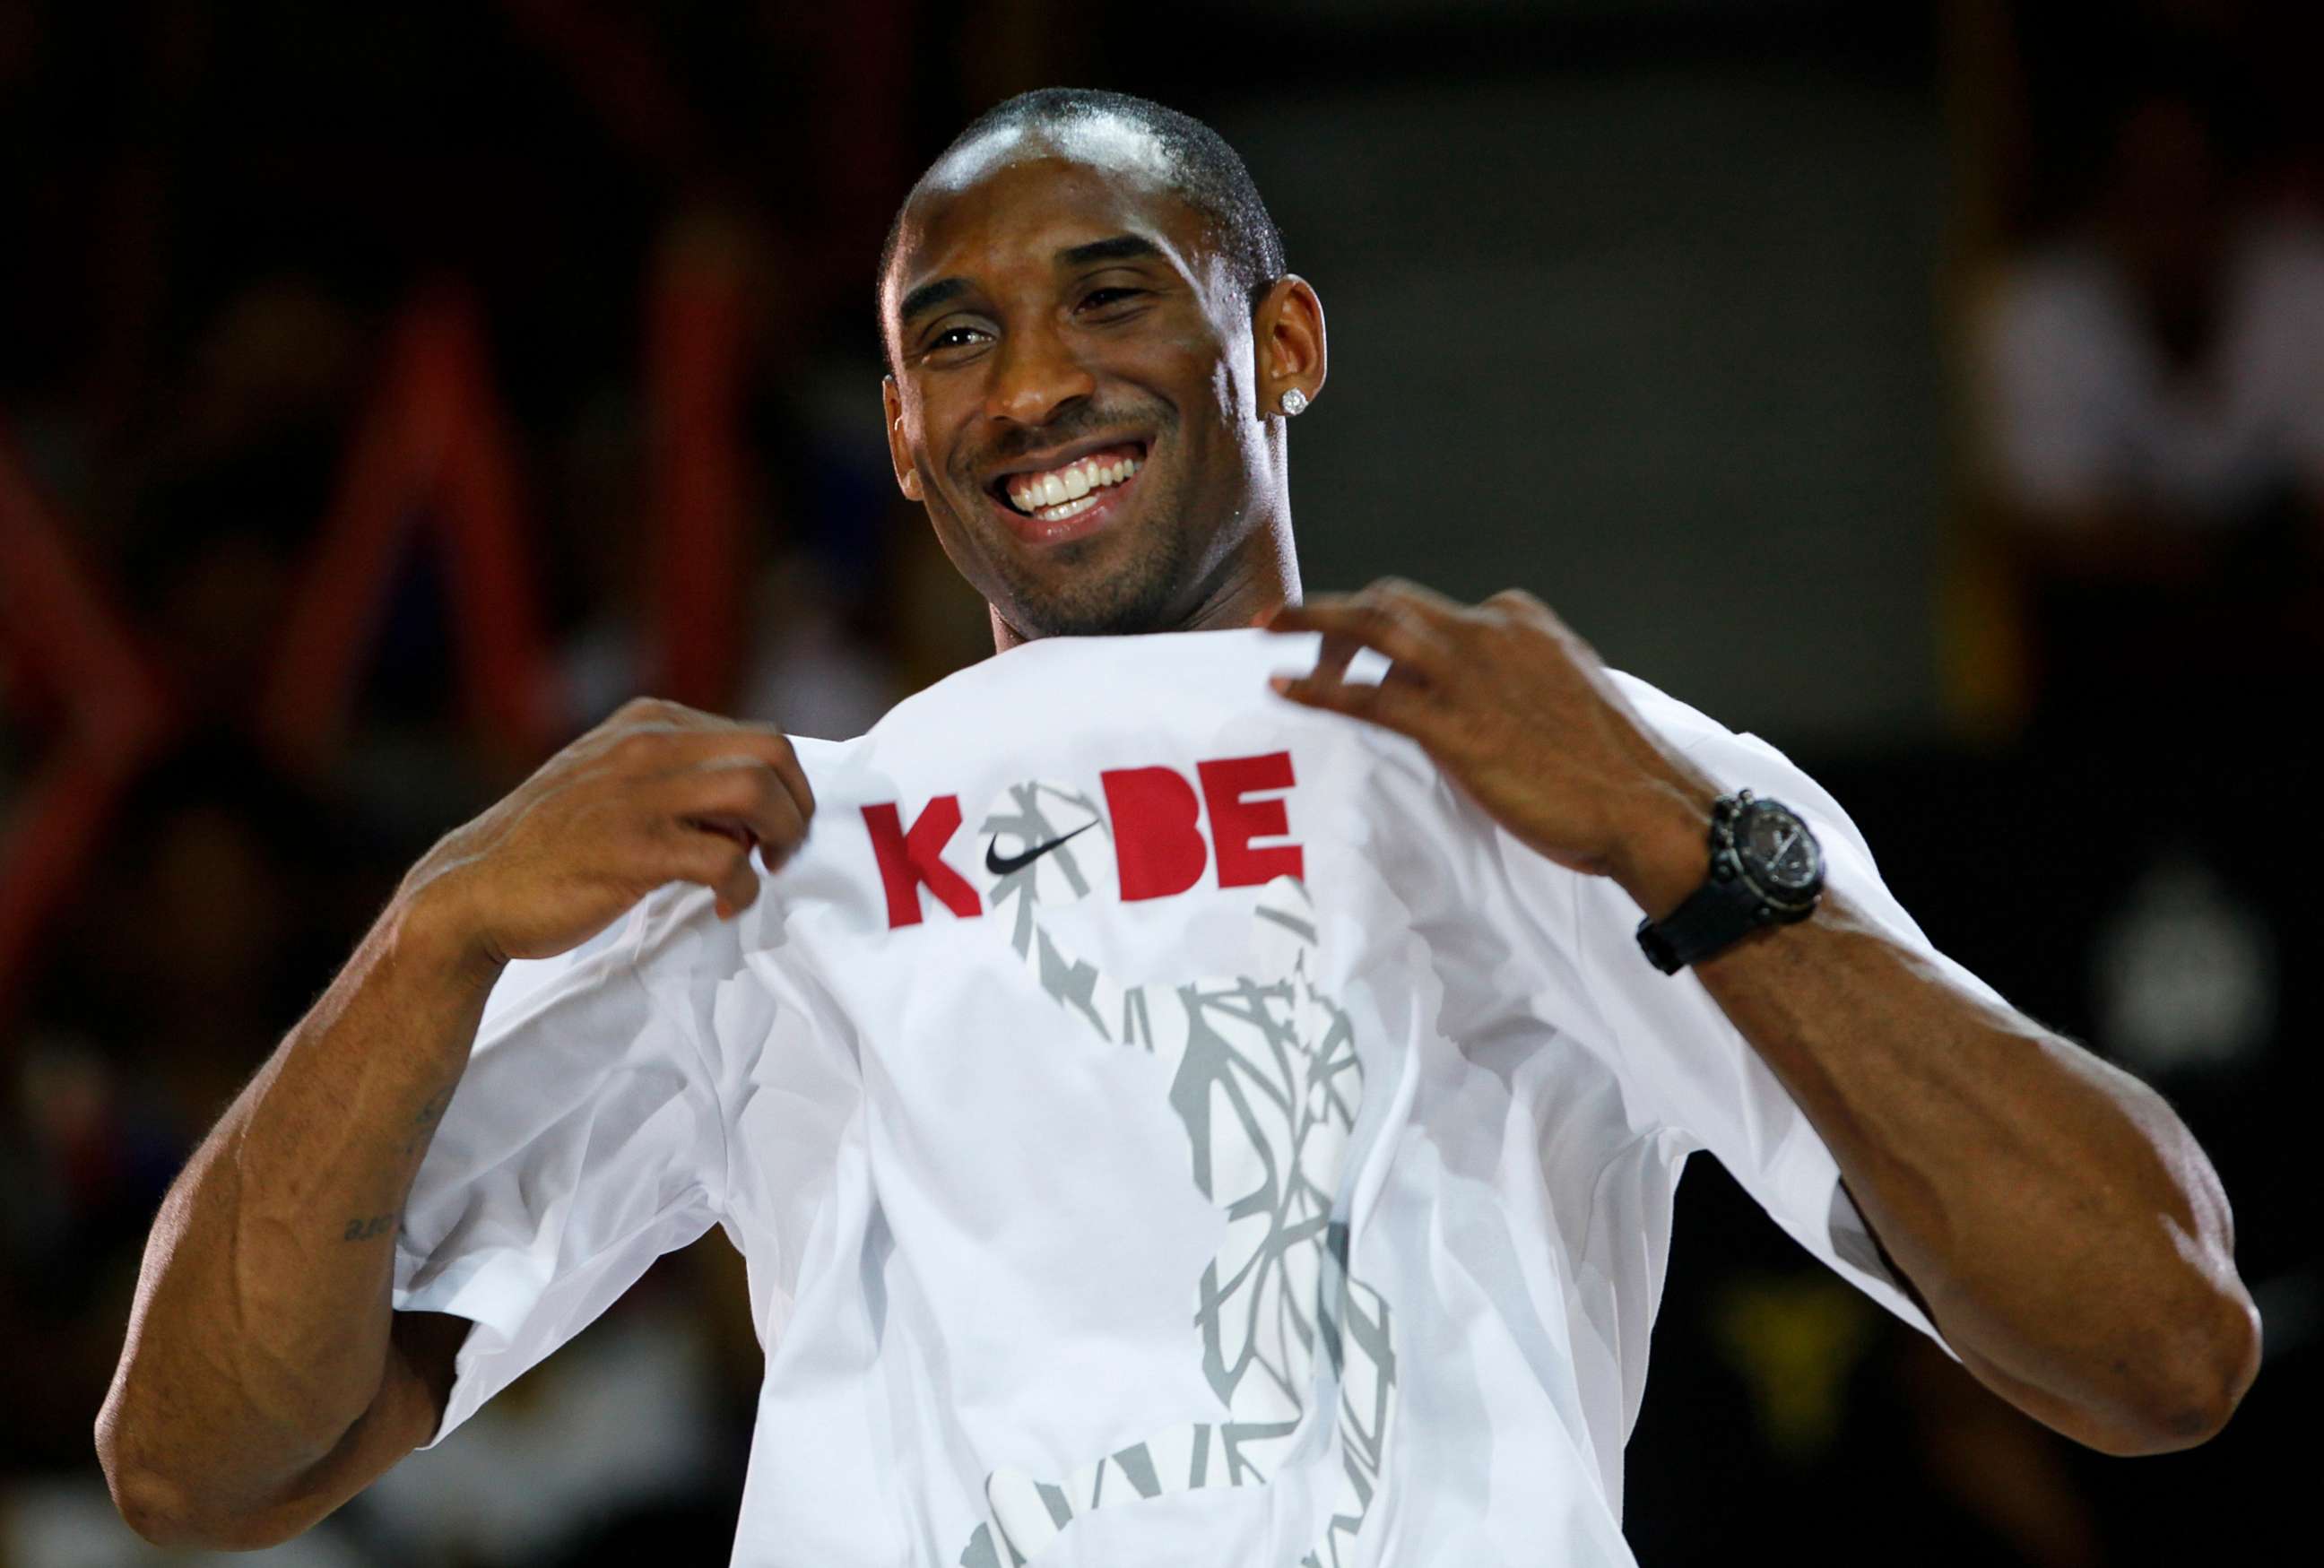 PHOTO: NBA superstar Kobe Bryant of the Los Angeles Lakers holds his T-shirt during a clinic Friday, July 24, 2009, in Hong Kong.